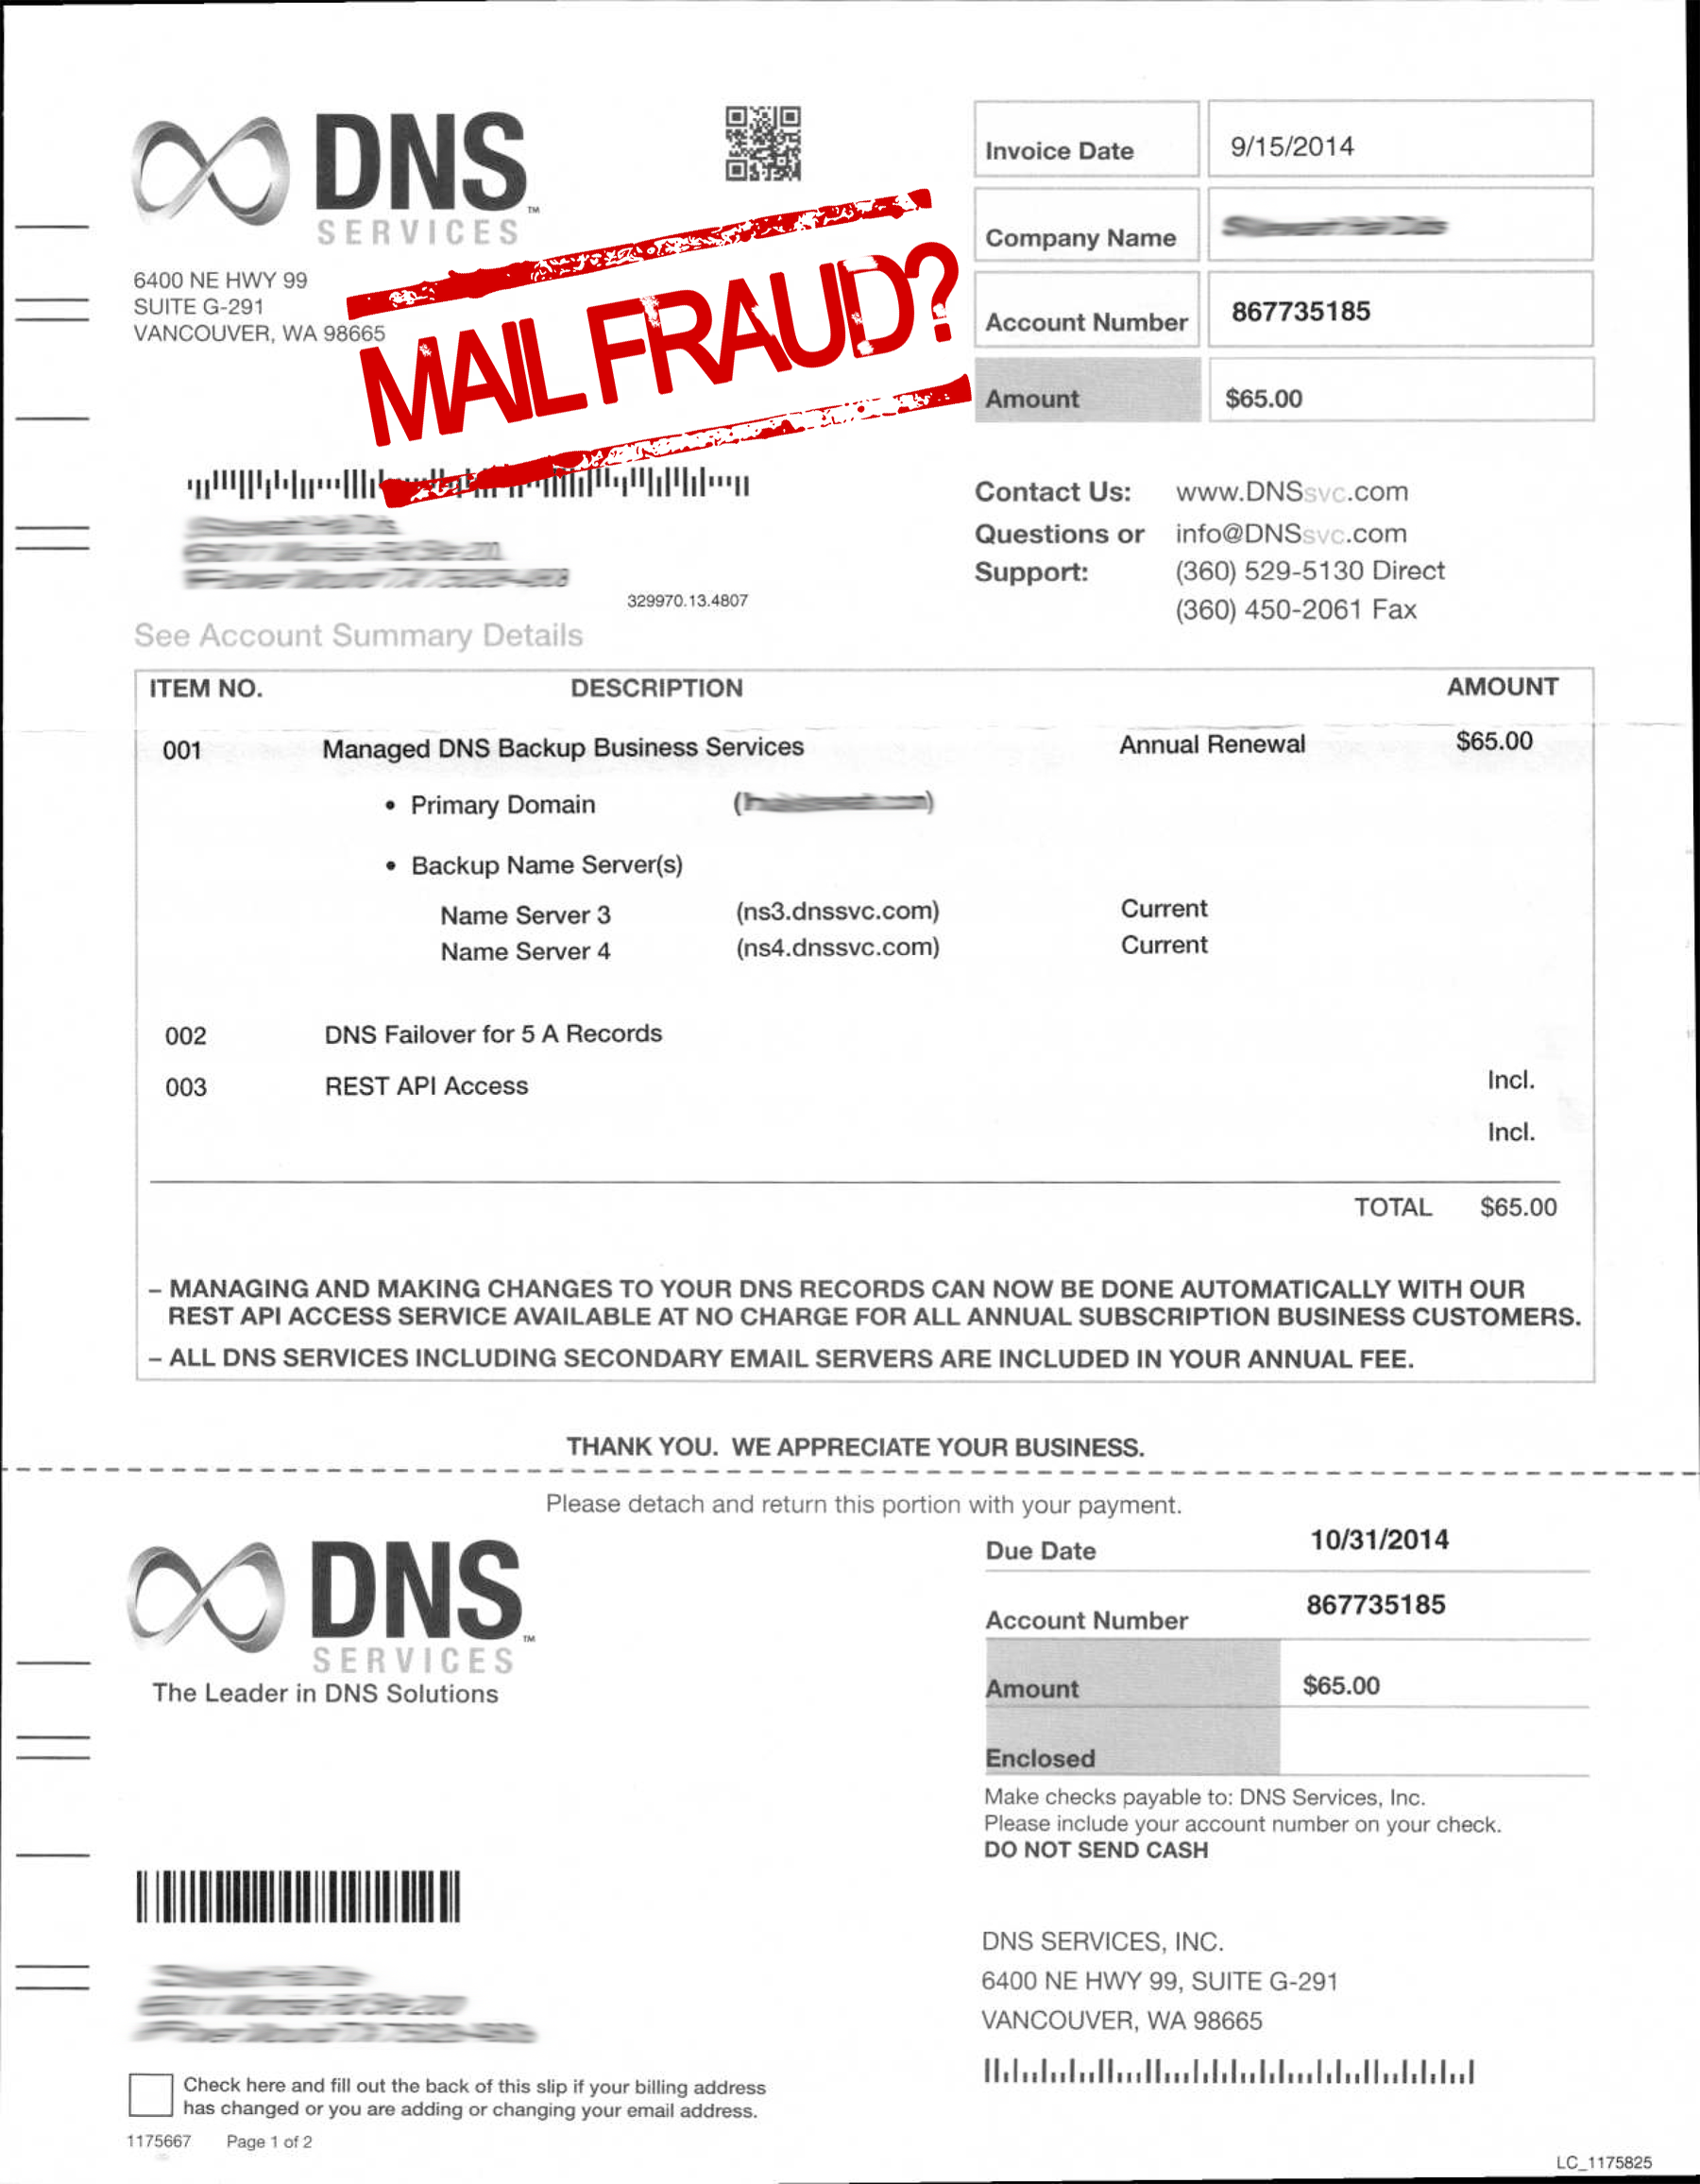 Don’t be fooled by mail and Internet scams